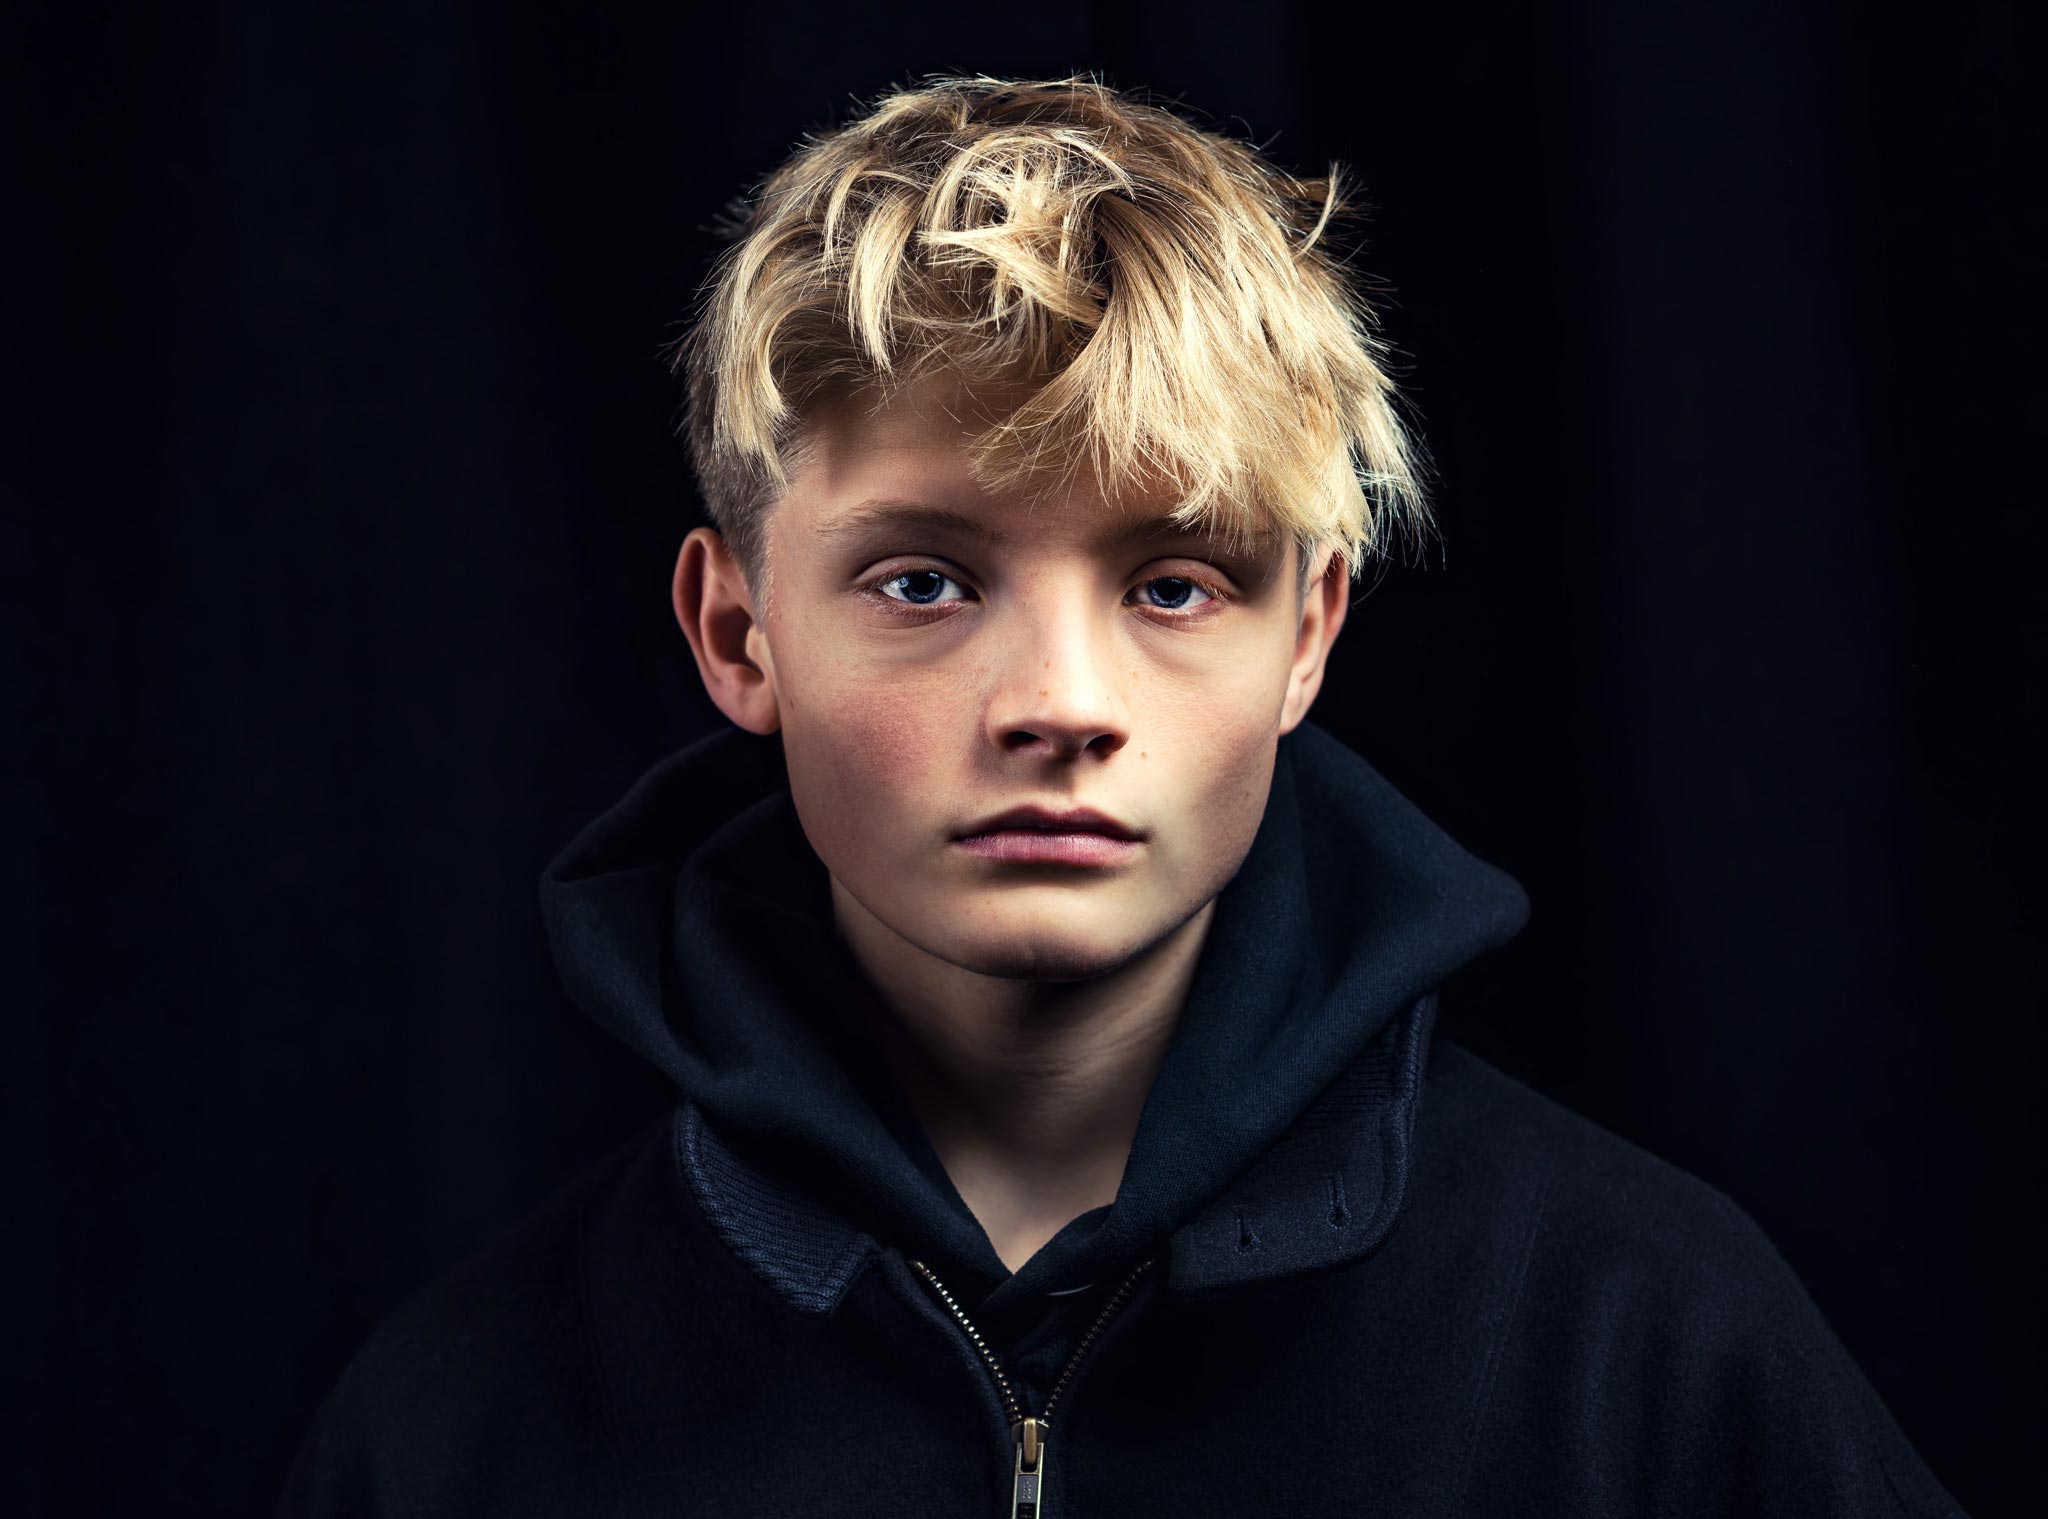 A boy model poses with a deadpan expression in a studio setting with professional lighting and a black backdrop, captured by Wright Content, a beauty photographer in London.